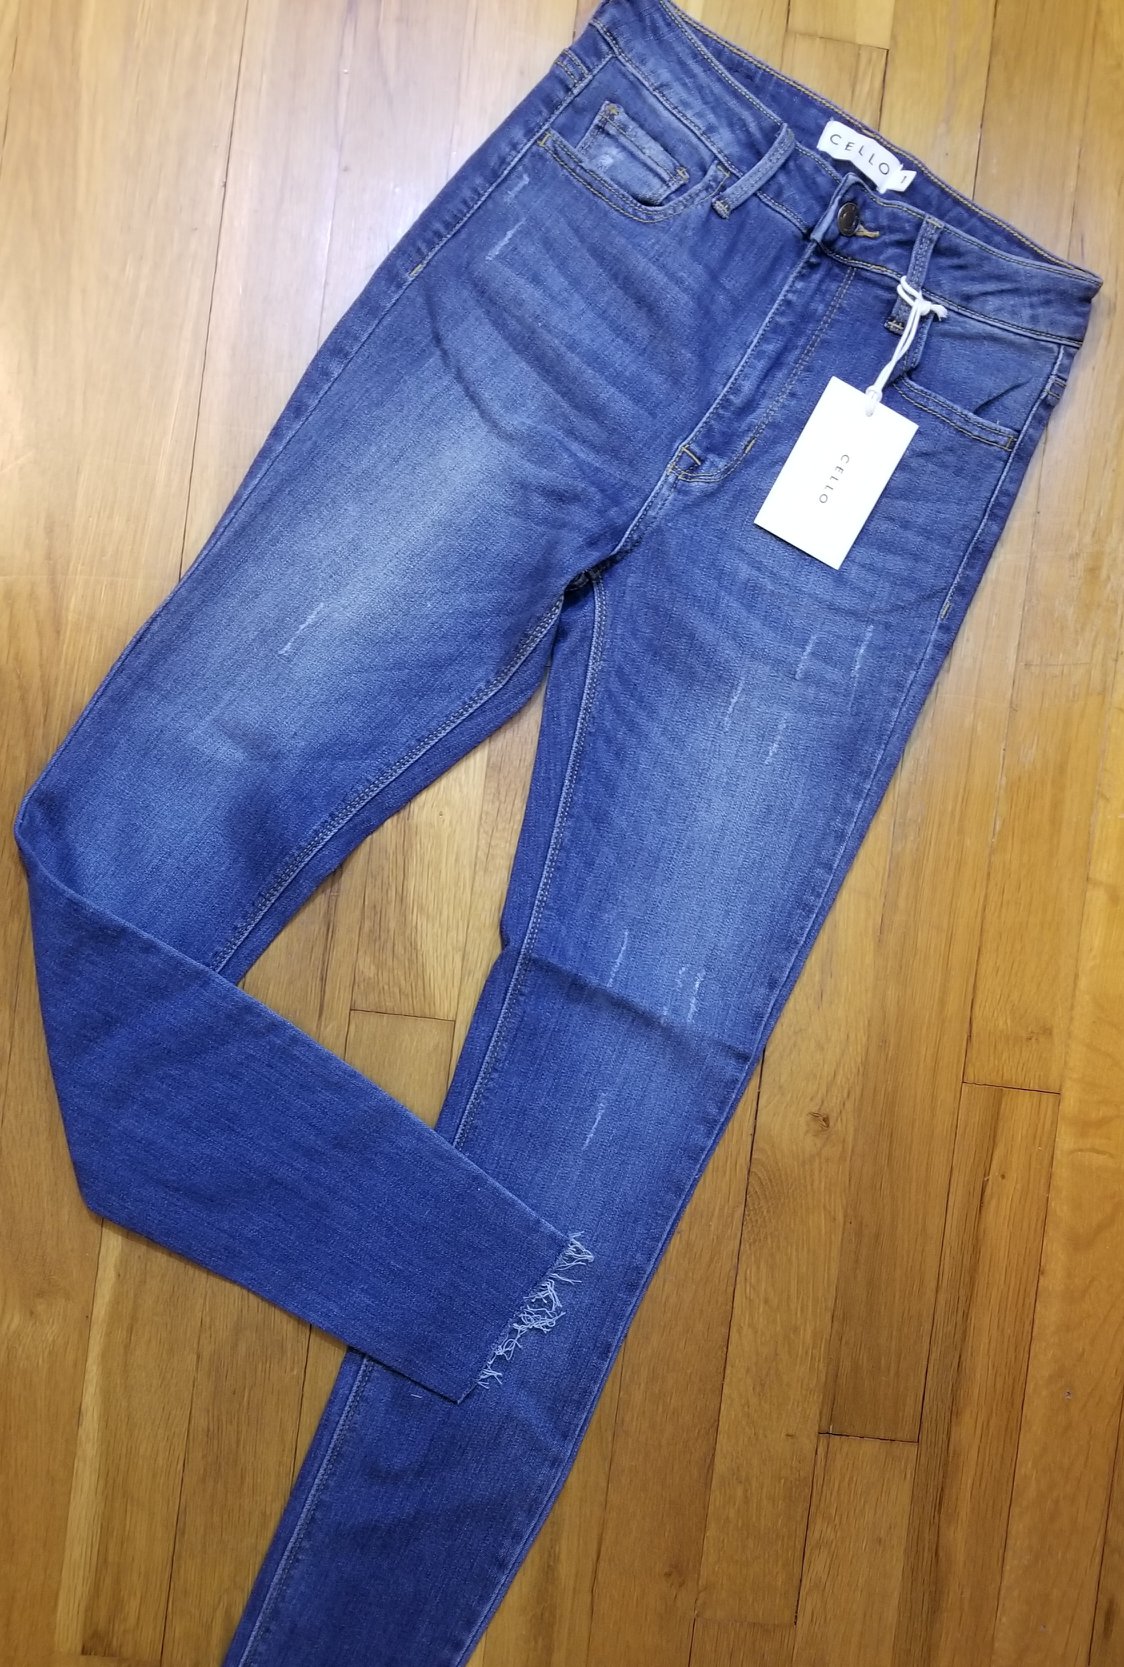 High Rise Skinny Jeans with Mild Distressing in Medium Wash